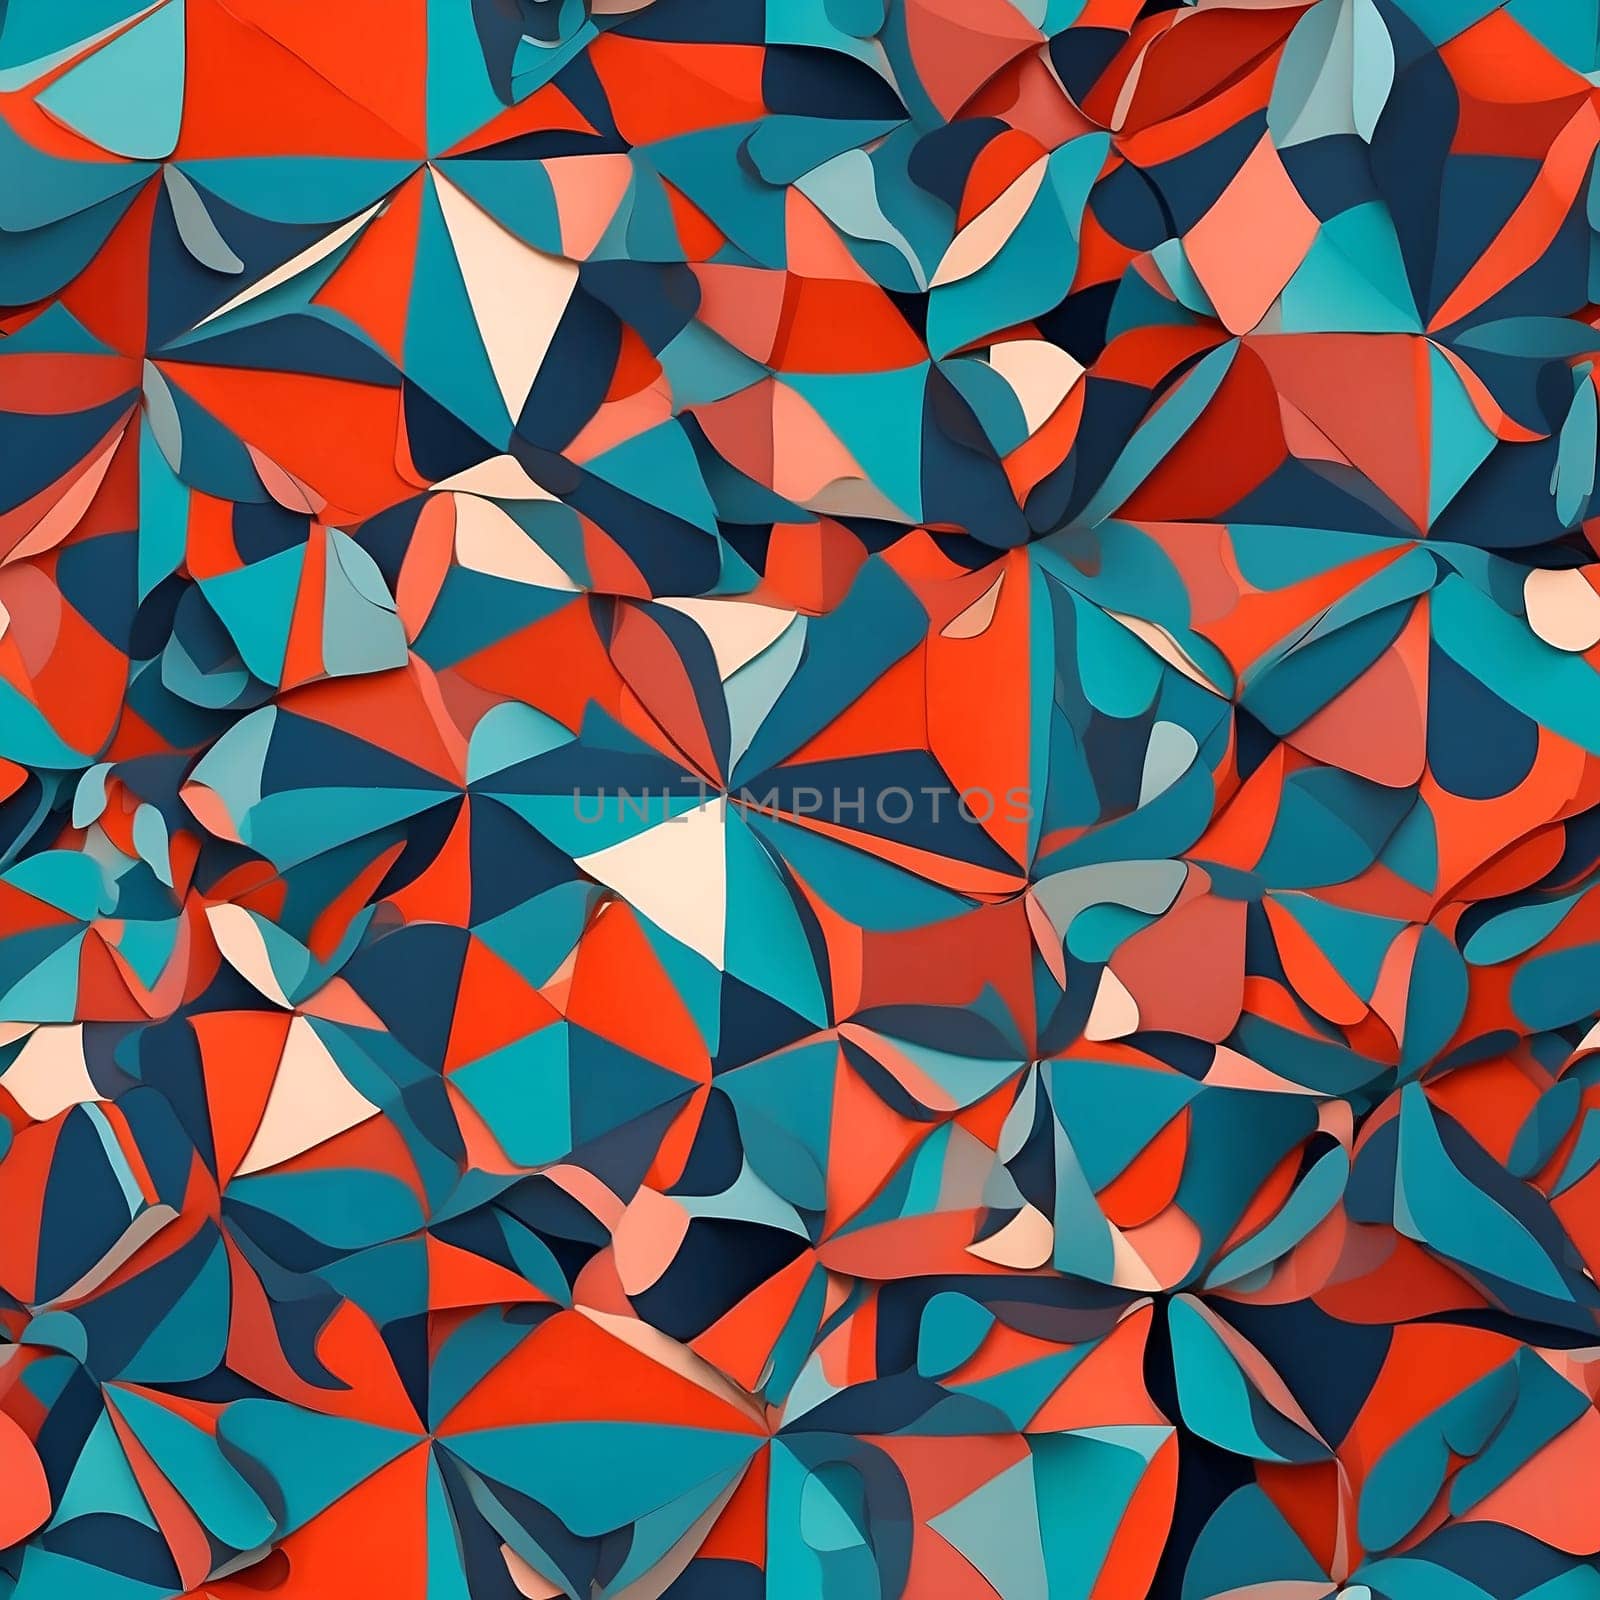 This photograph showcases a visually striking seamless pattern featuring an abundance of colorful triangles.